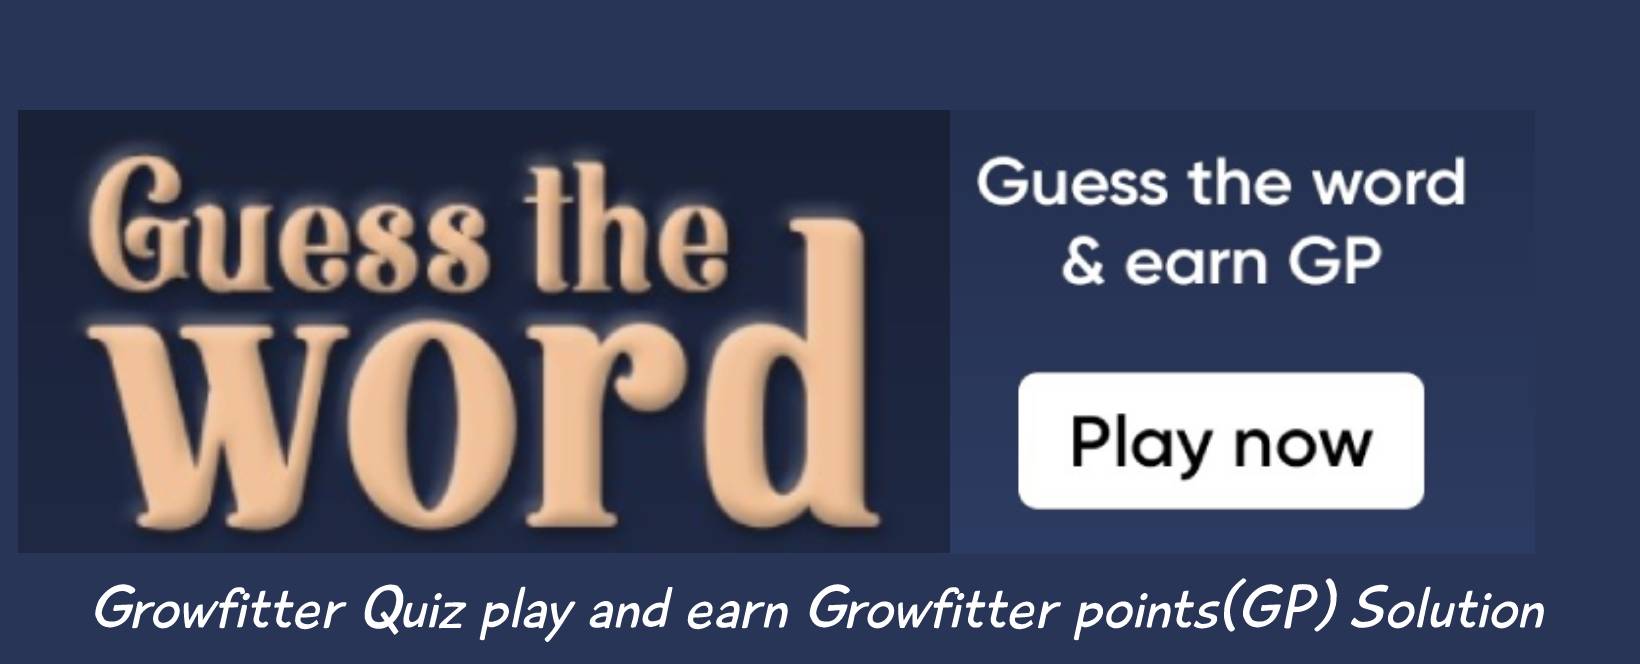 growfitter-guss-the-word